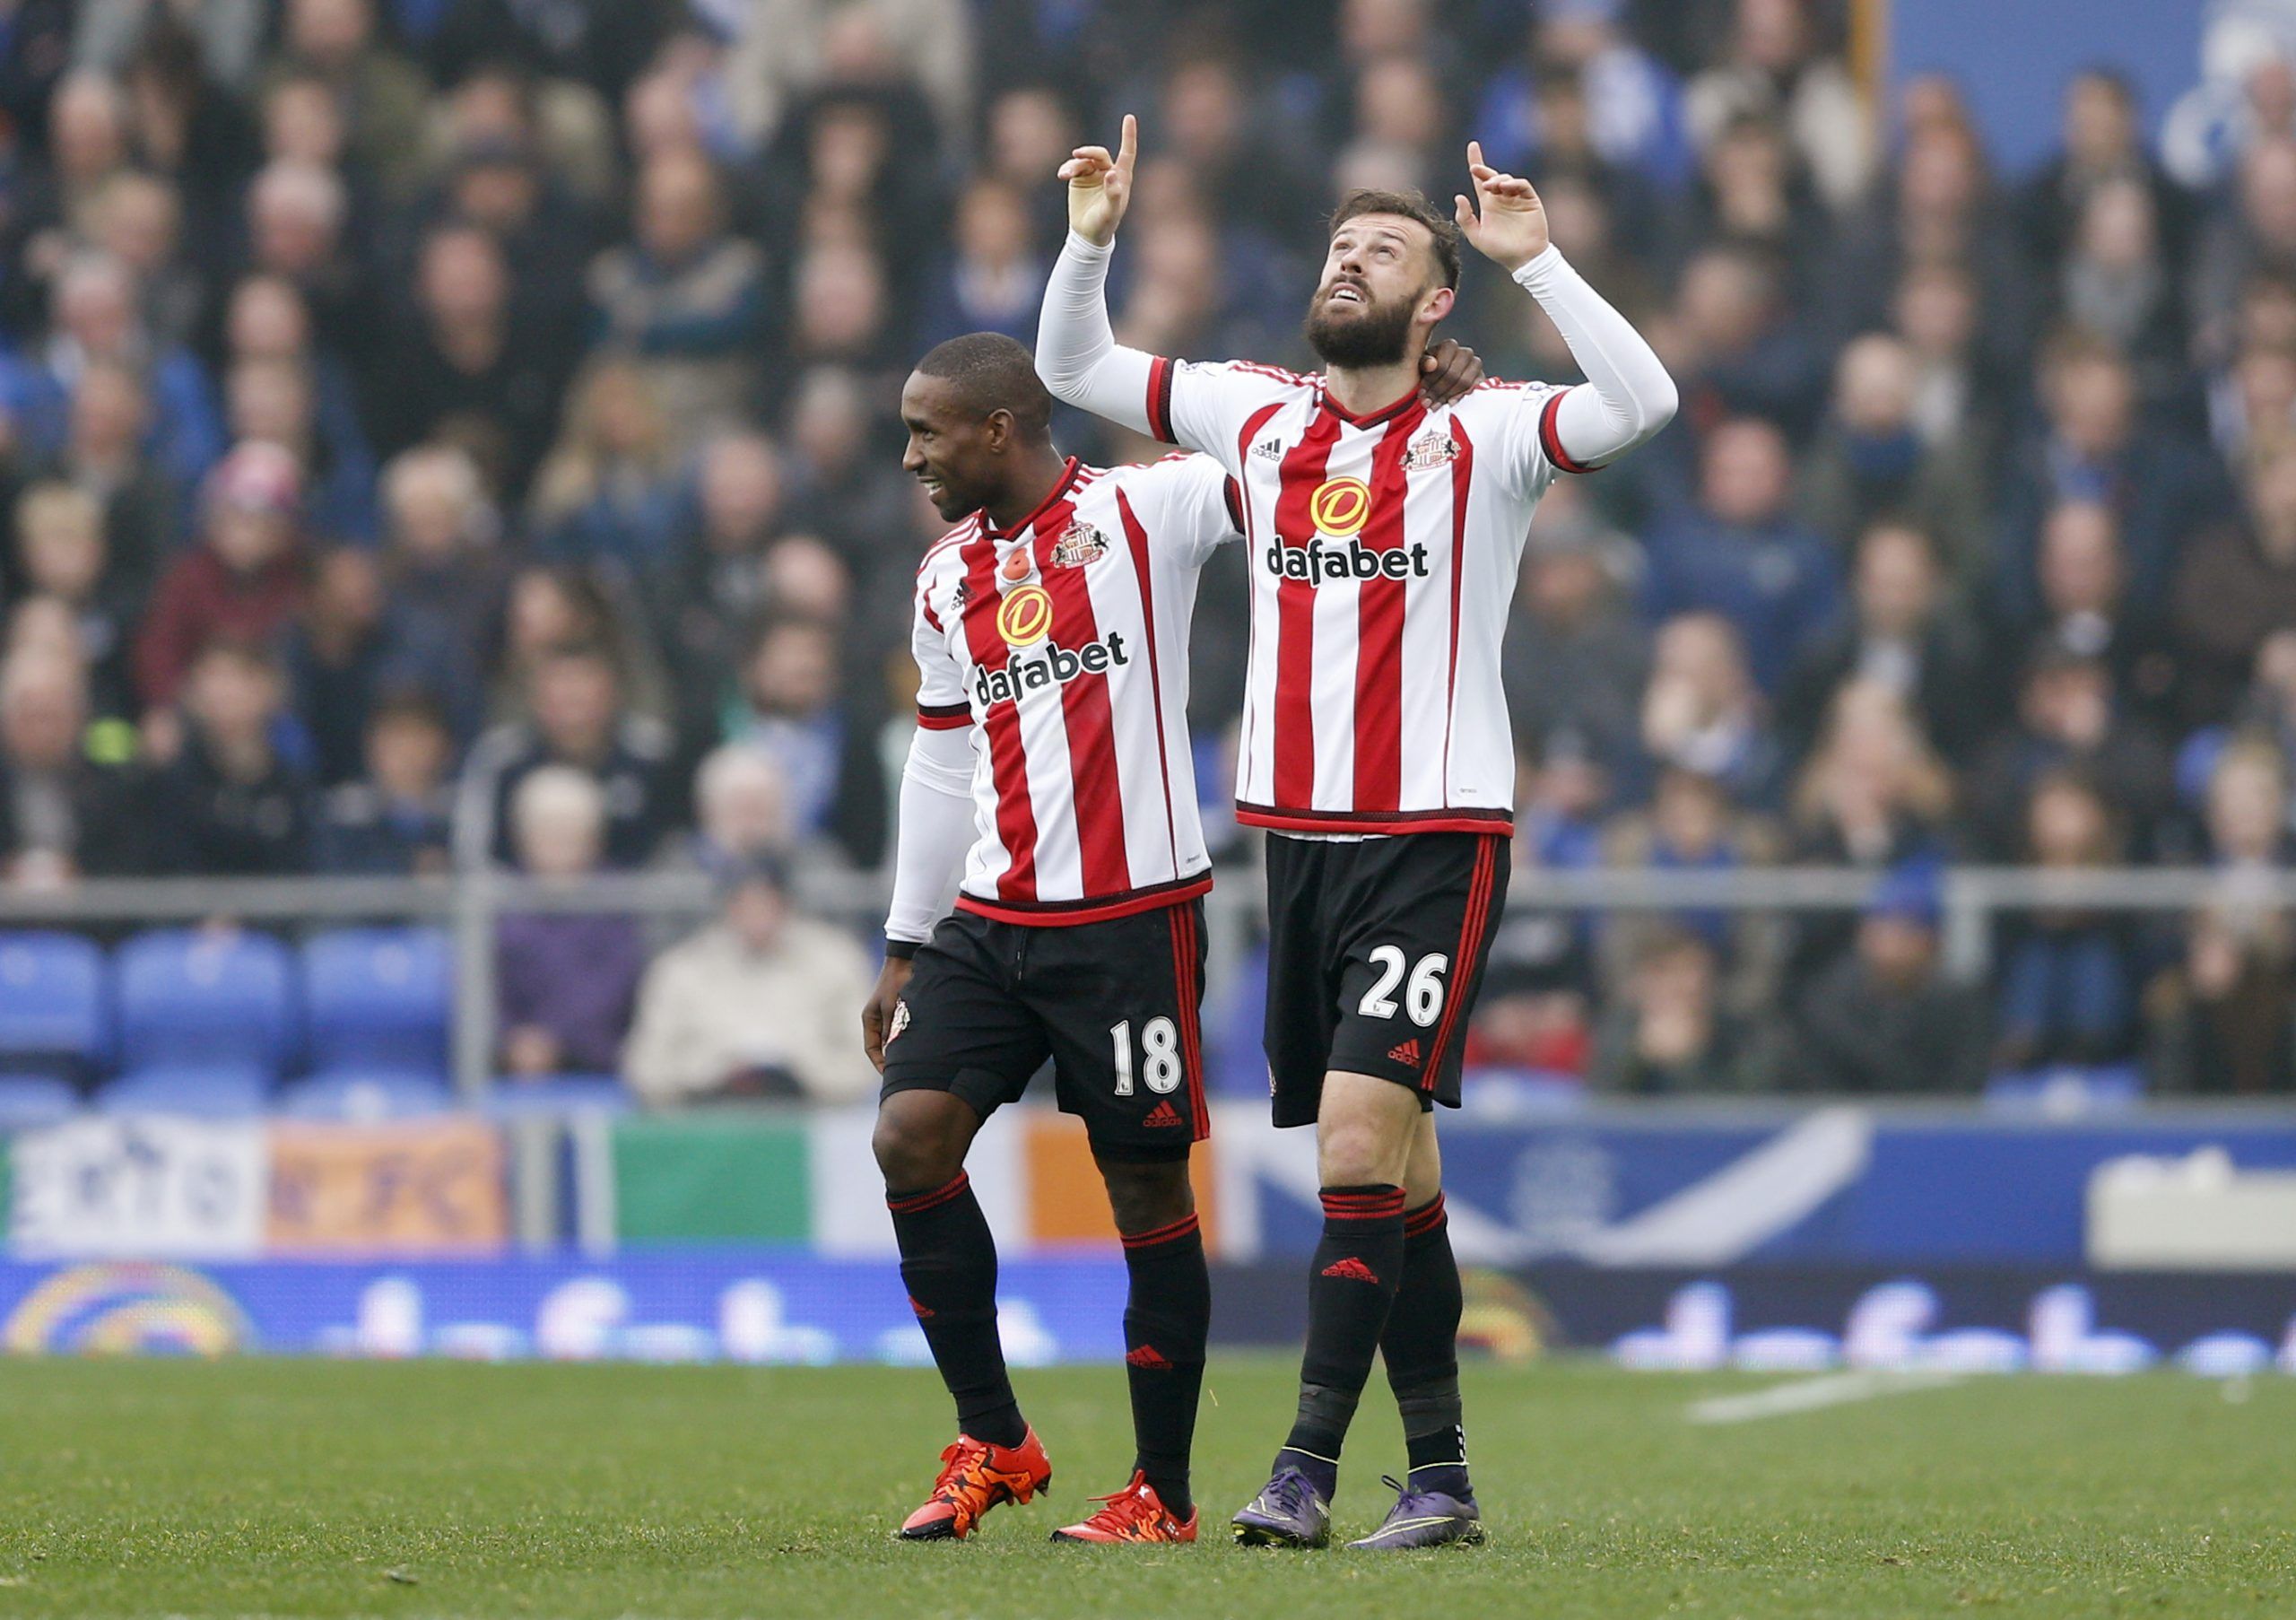 Football - Everton v Sunderland - Barclays Premier League - Goodison Park - 1/11/15 
Steven Fletcher celebrates with Jermain Defoe after scoring the second goal for Sunderland 
Action Images via Reuters / Carl Recine 
Livepic 
EDITORIAL USE ONLY. No use with unauthorized audio, video, data, fixture lists, club/league logos or 